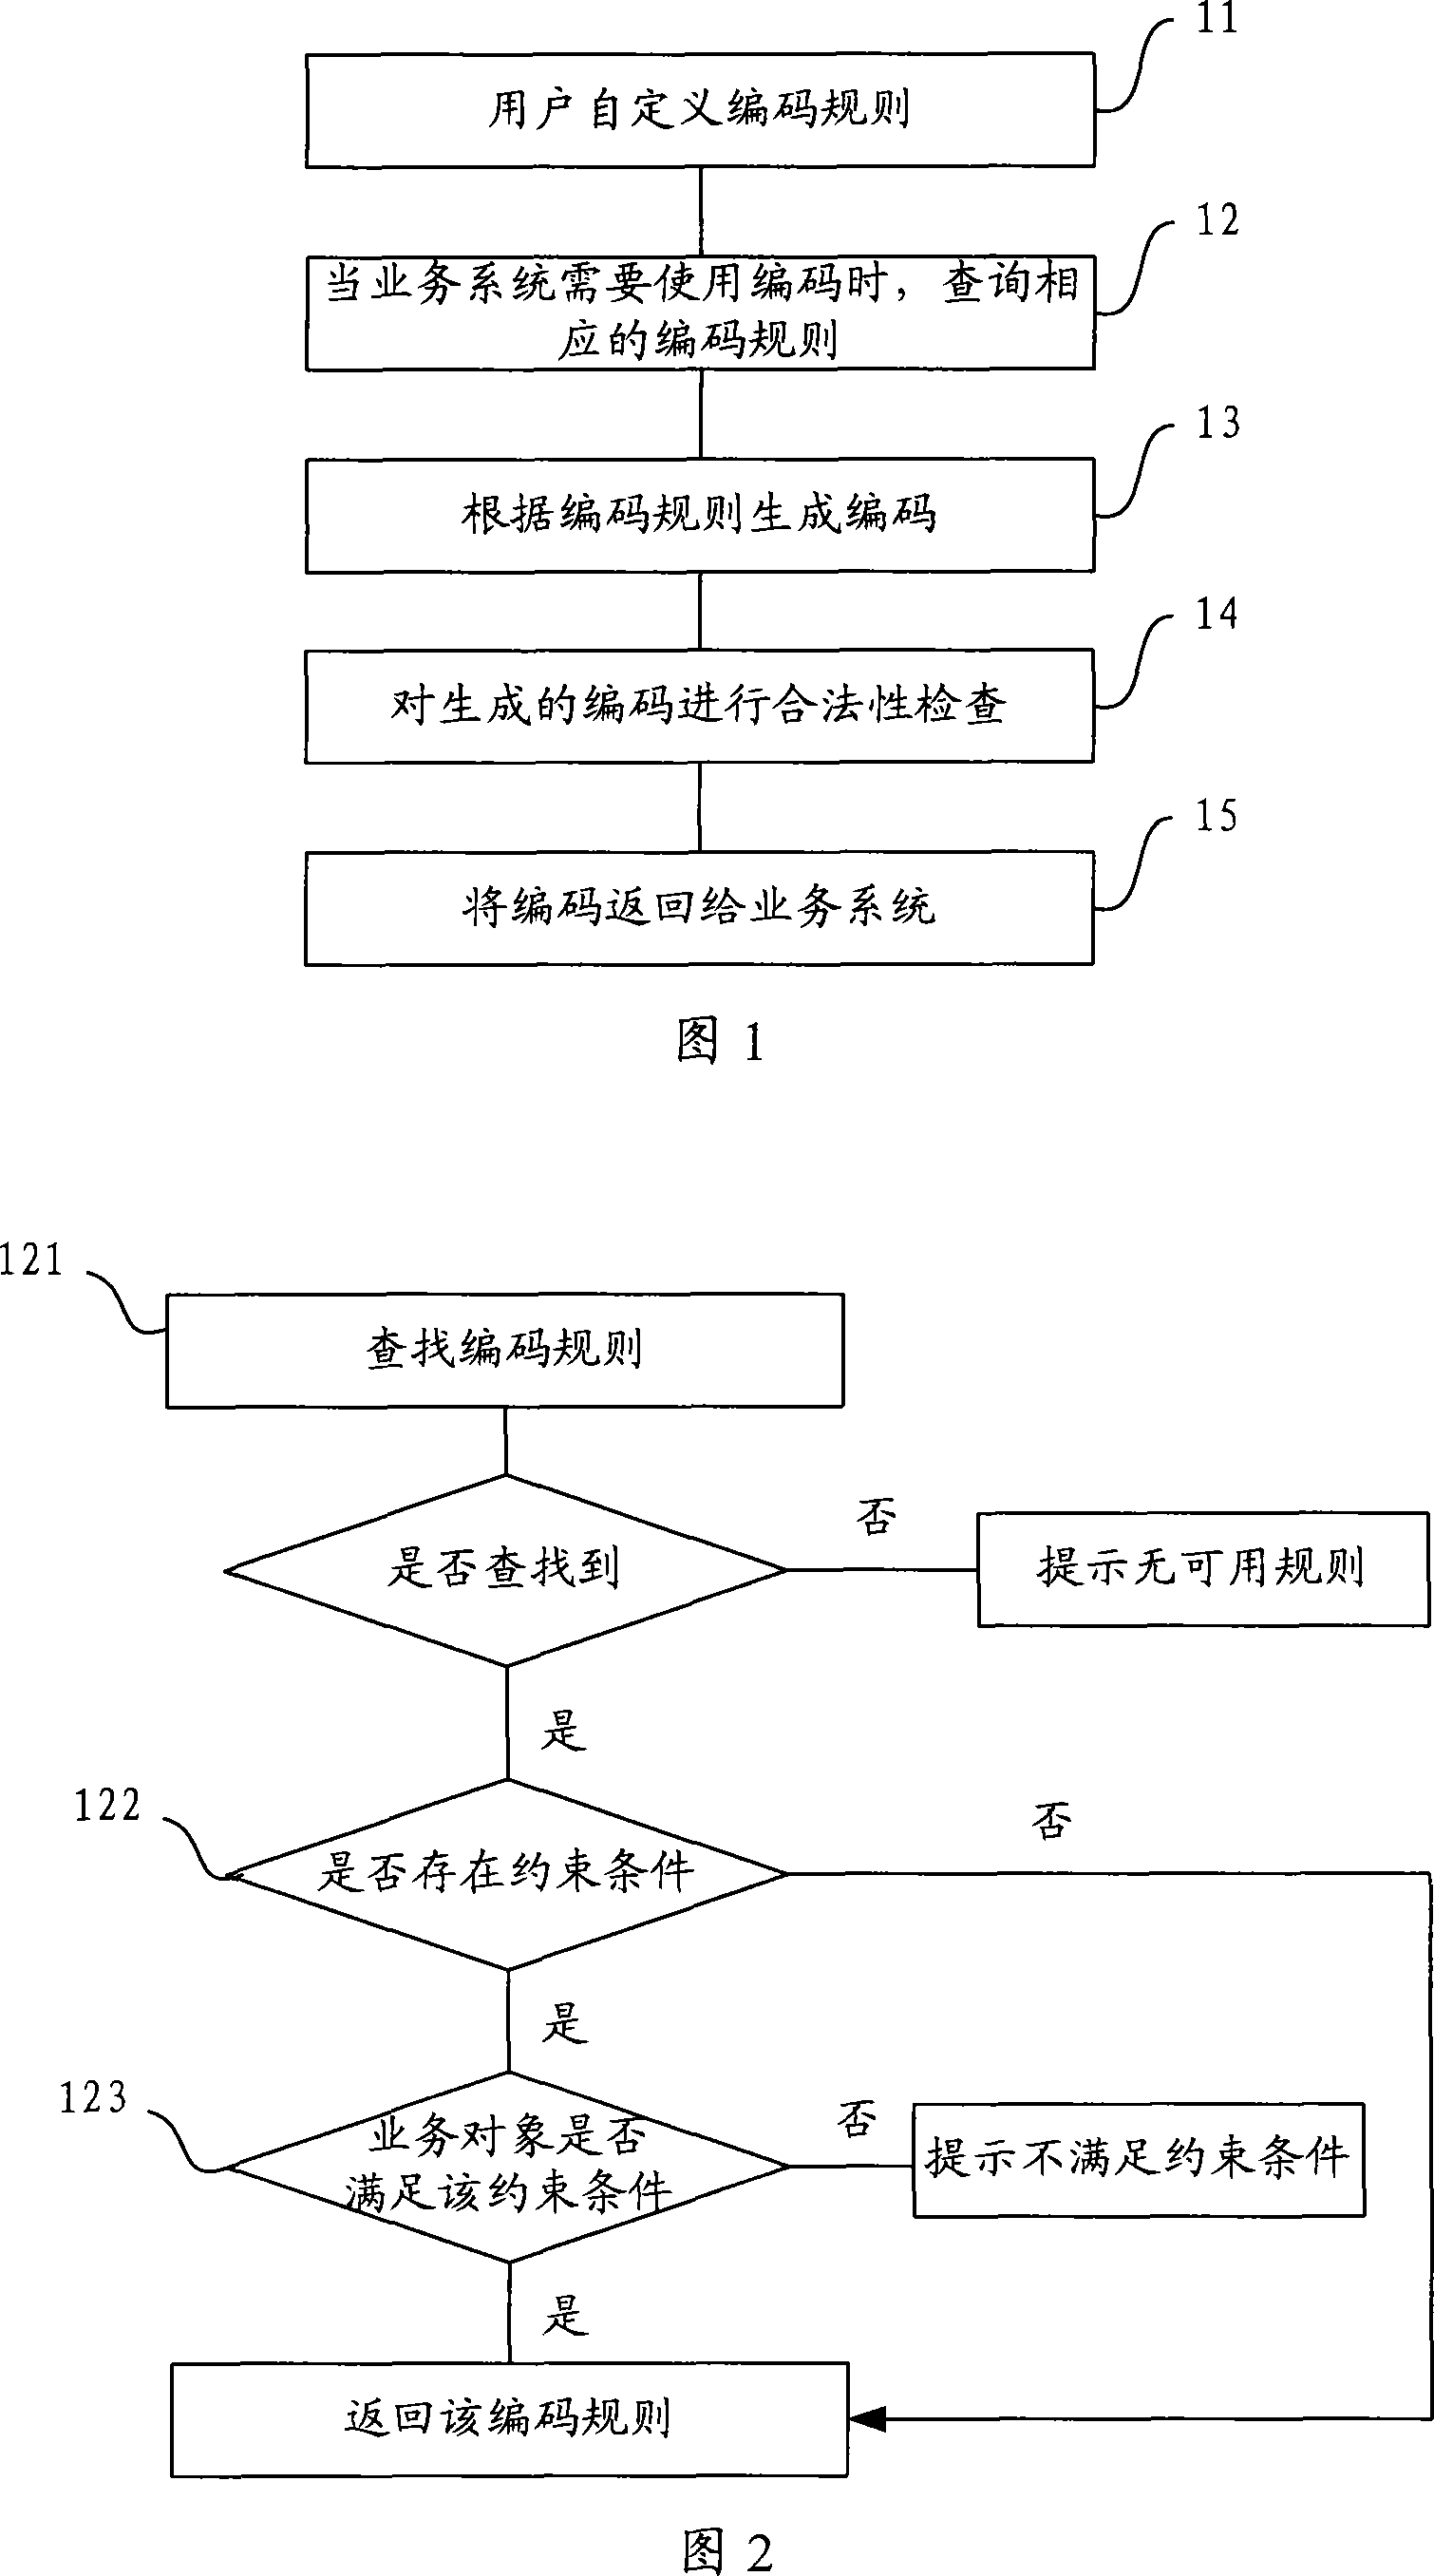 Method and system for creating operation code